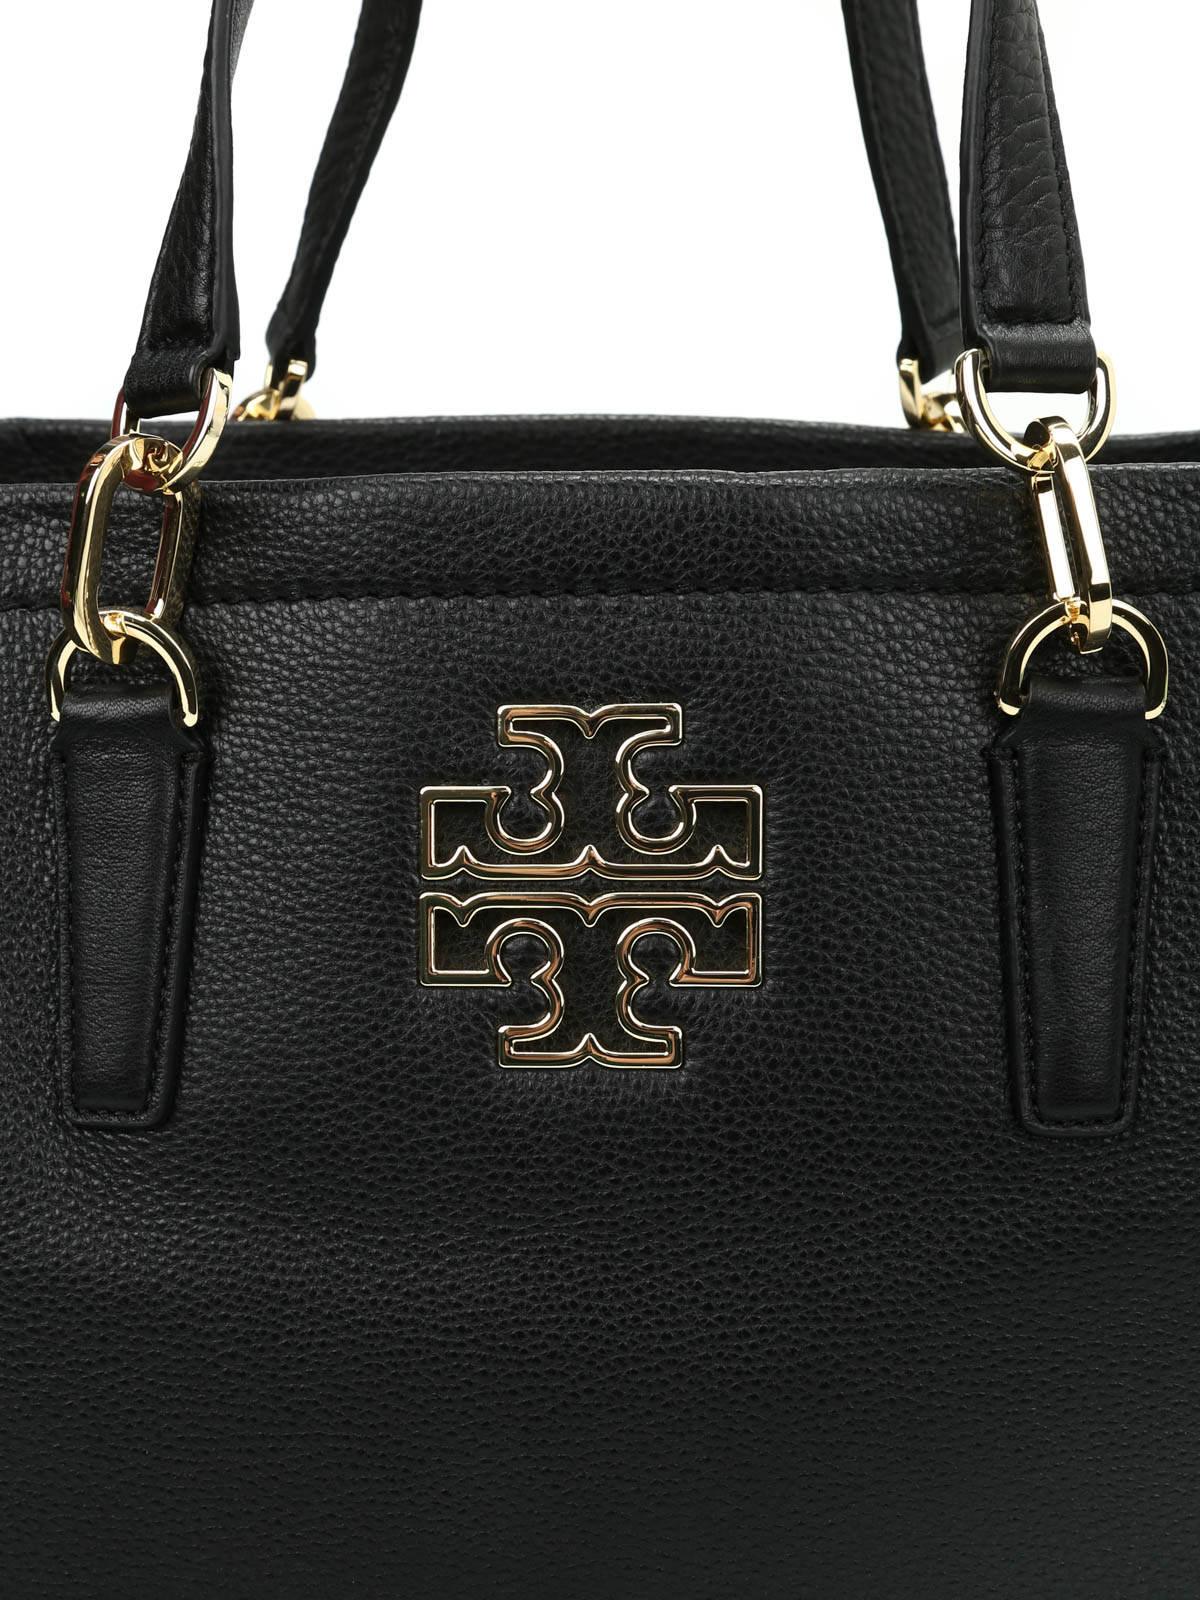 Totes bags Tory Burch - Britten hammered leather tote - 31159878001